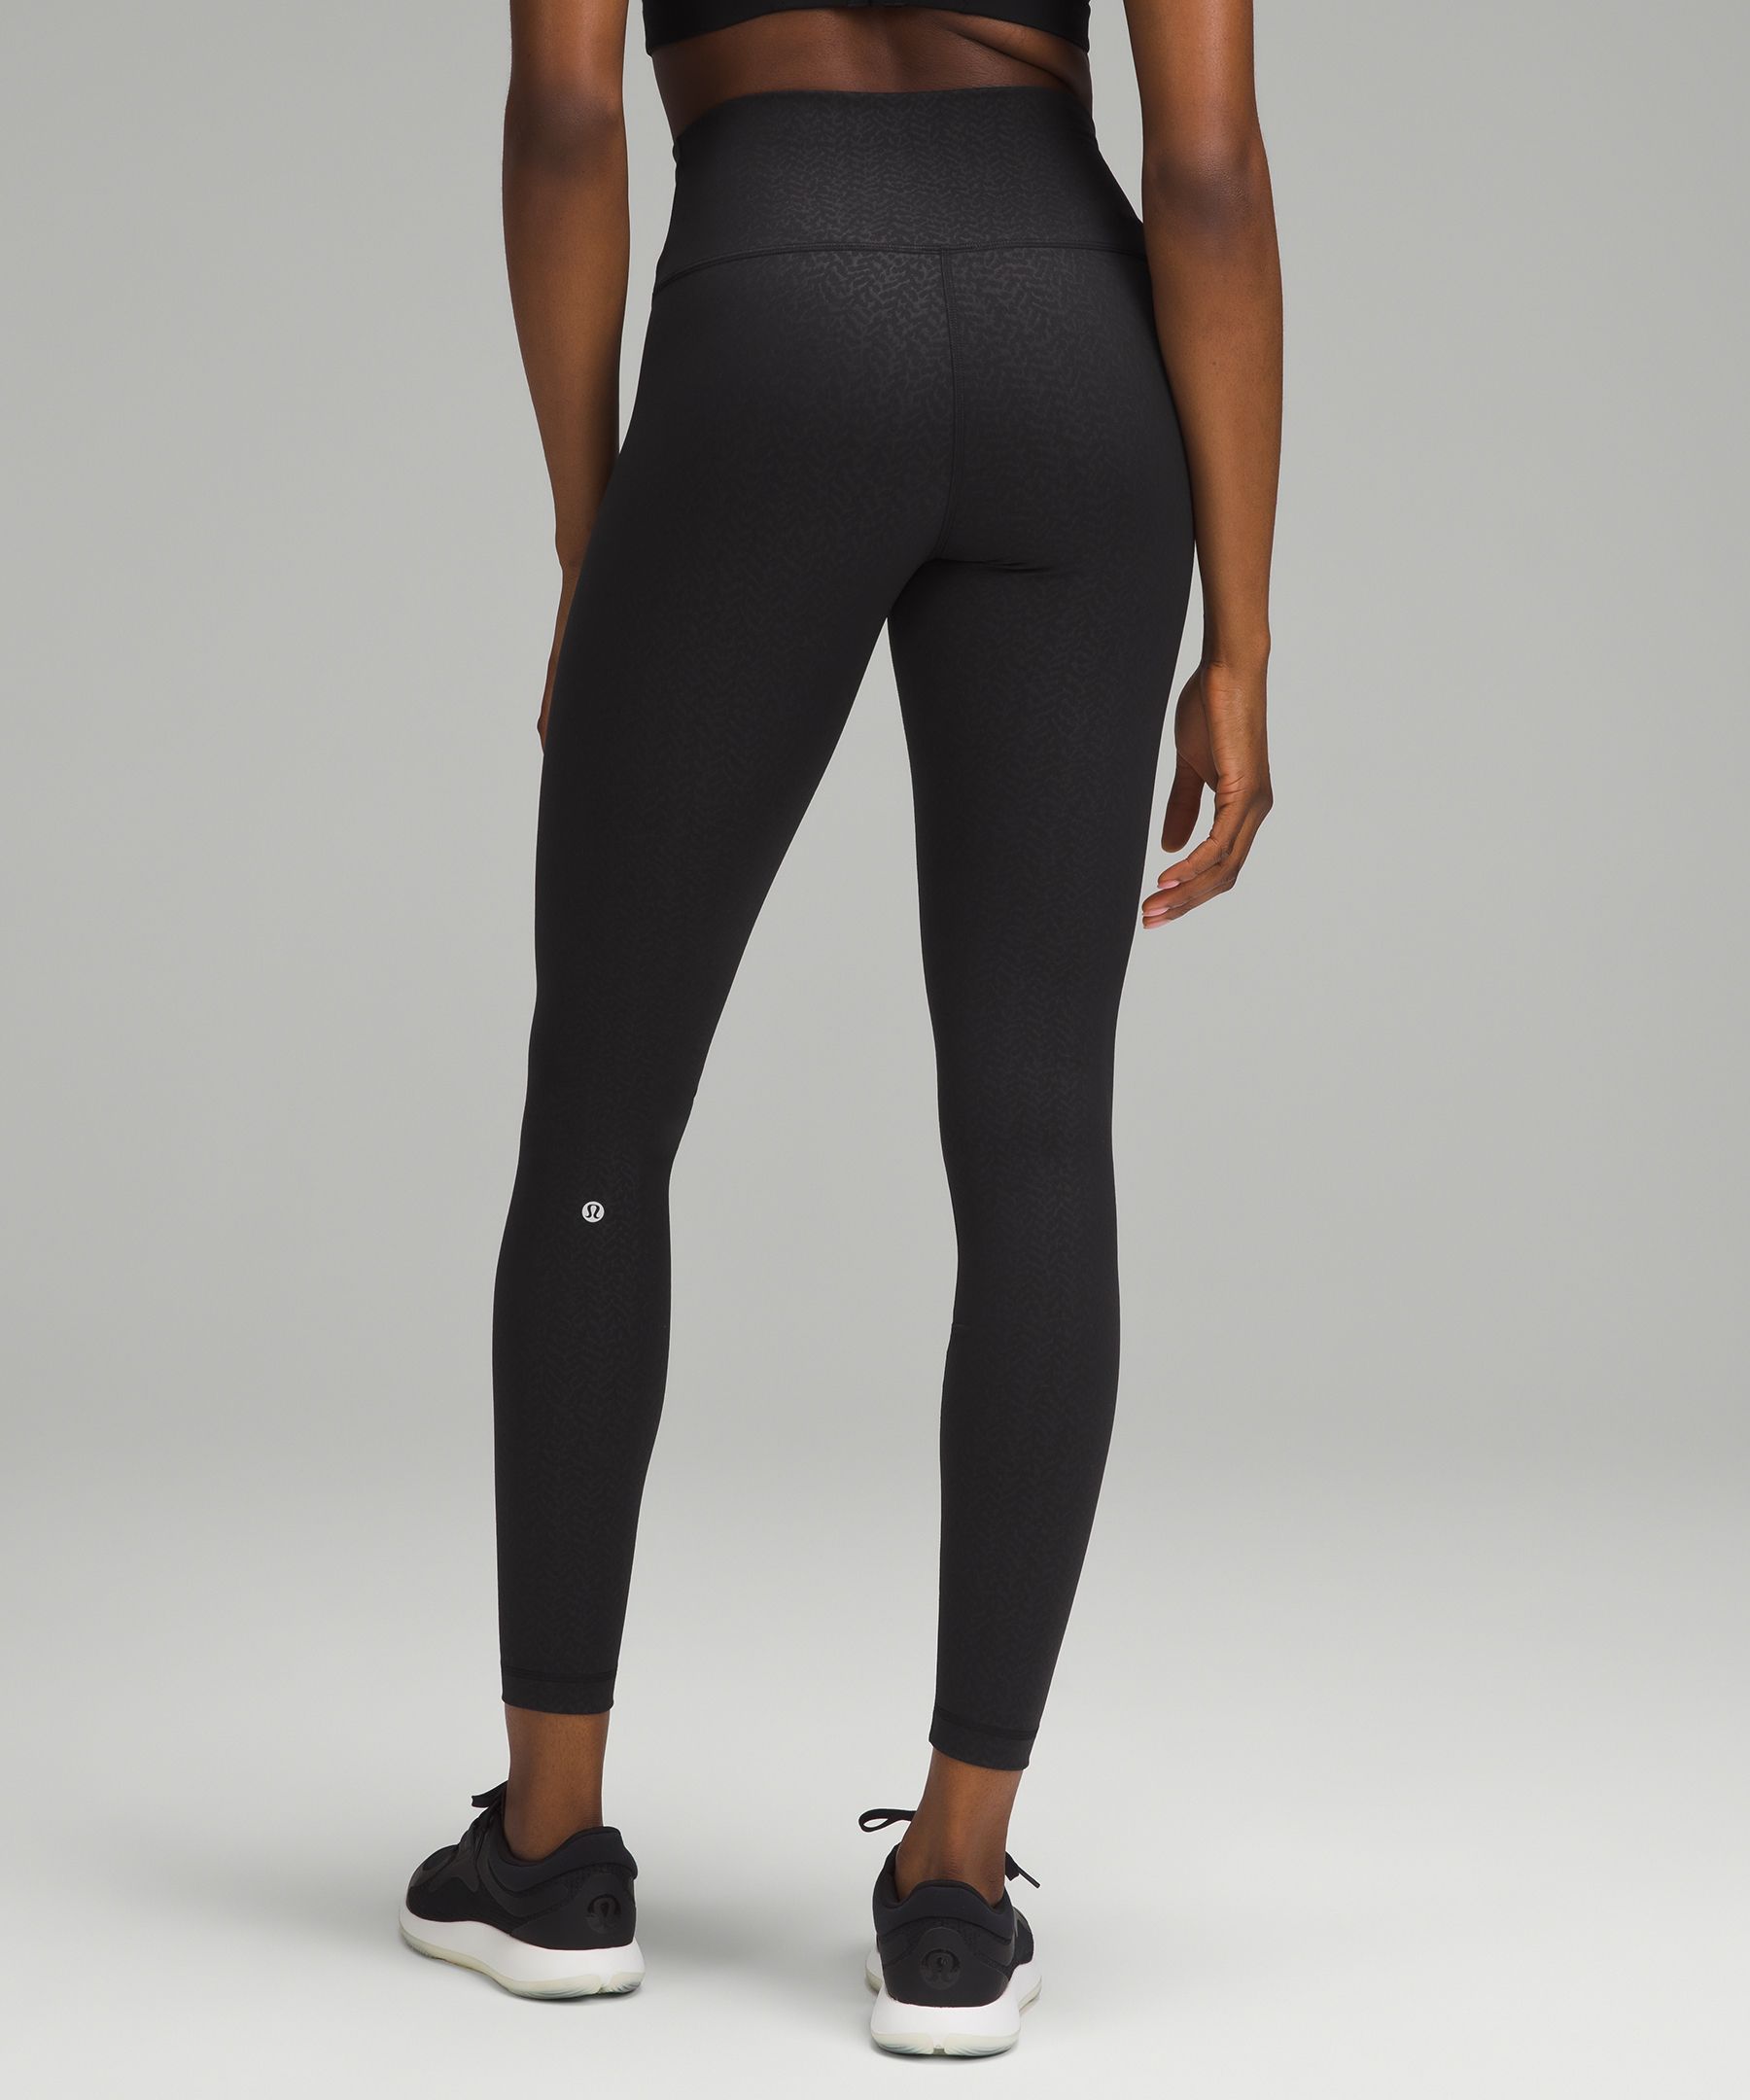 Lululemon Wunder Train High-Rise Tight 25 Deep Luxe Size 8 MSRP $ 98.00  **NWT**